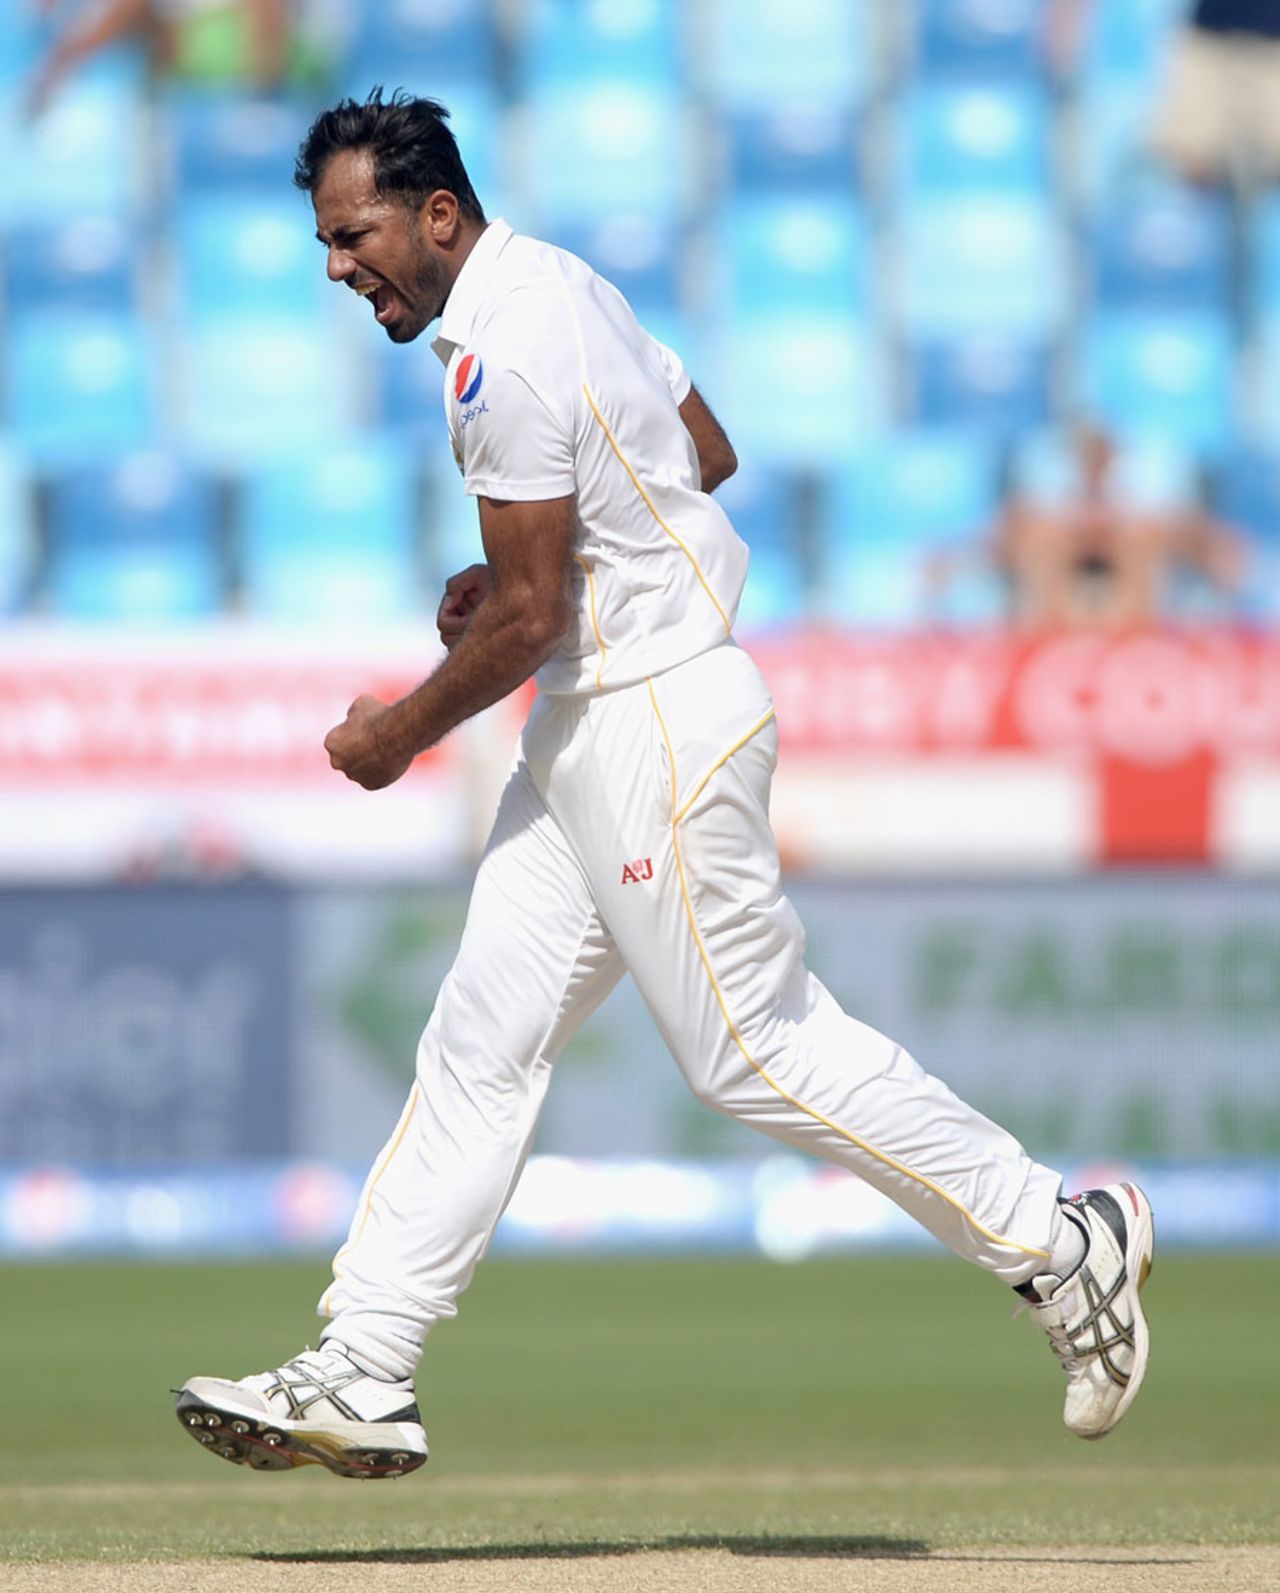 Wahab Riaz removed Joe Root early on, Pakistan v England, 2nd Test, Dubai, 3rd day, October 24, 2015